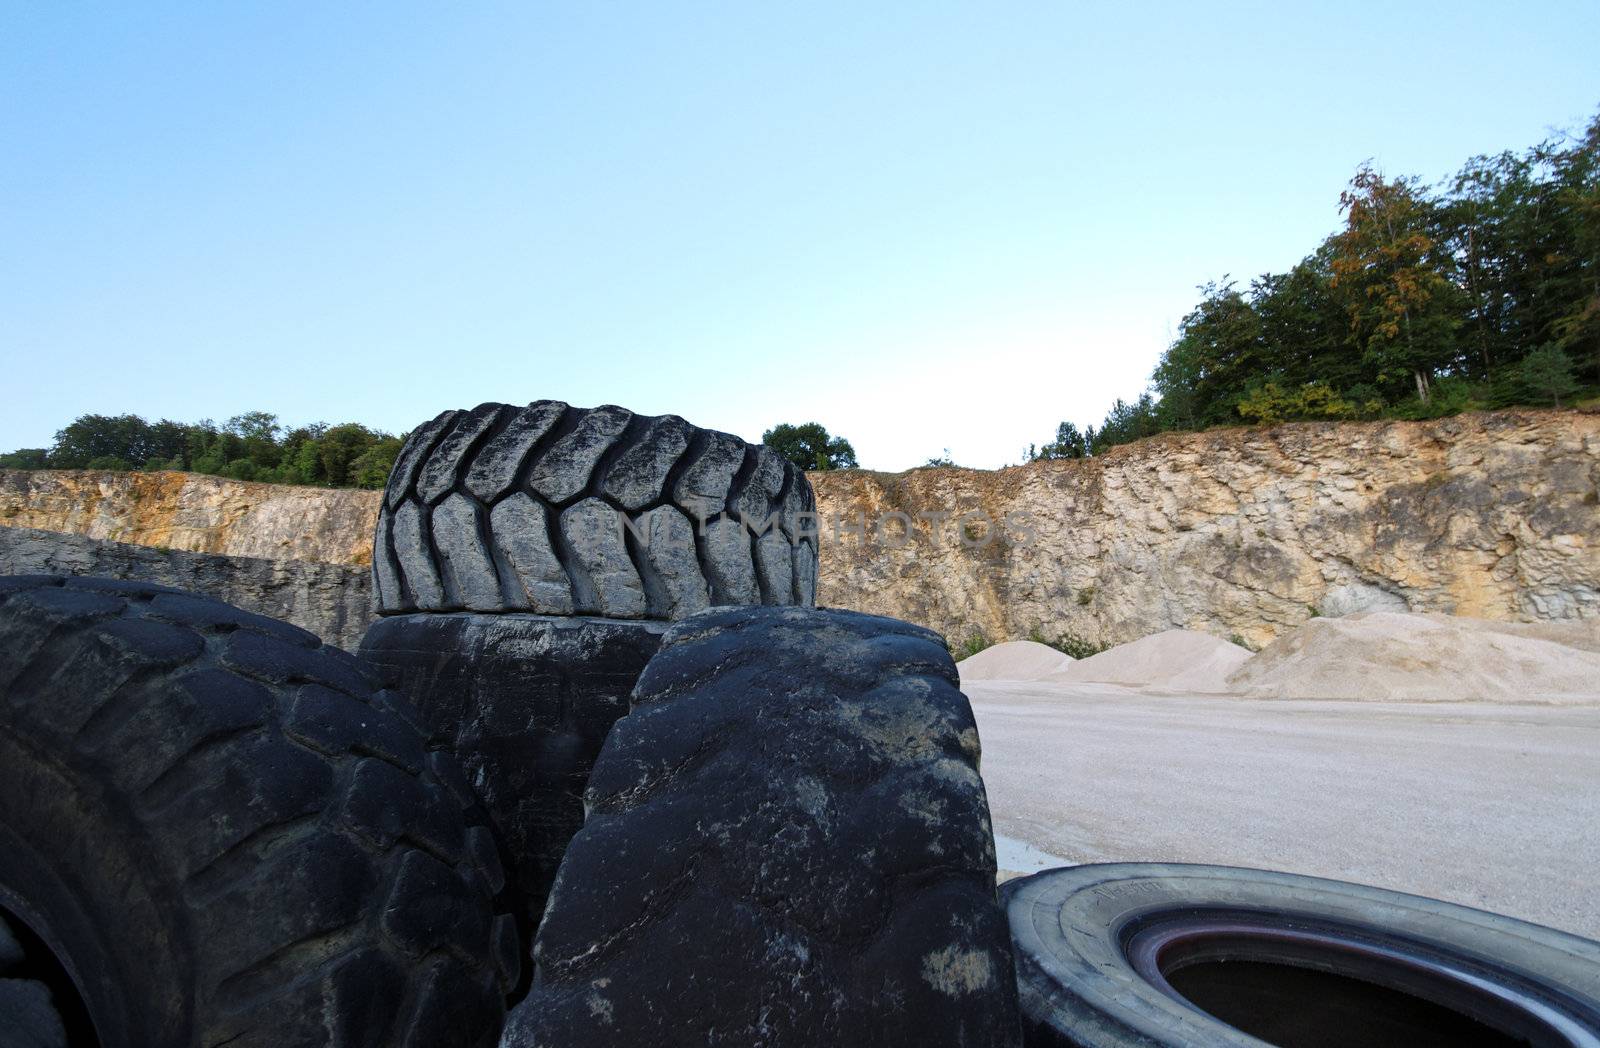 Old truck tires in a stone quarry in south western Germany